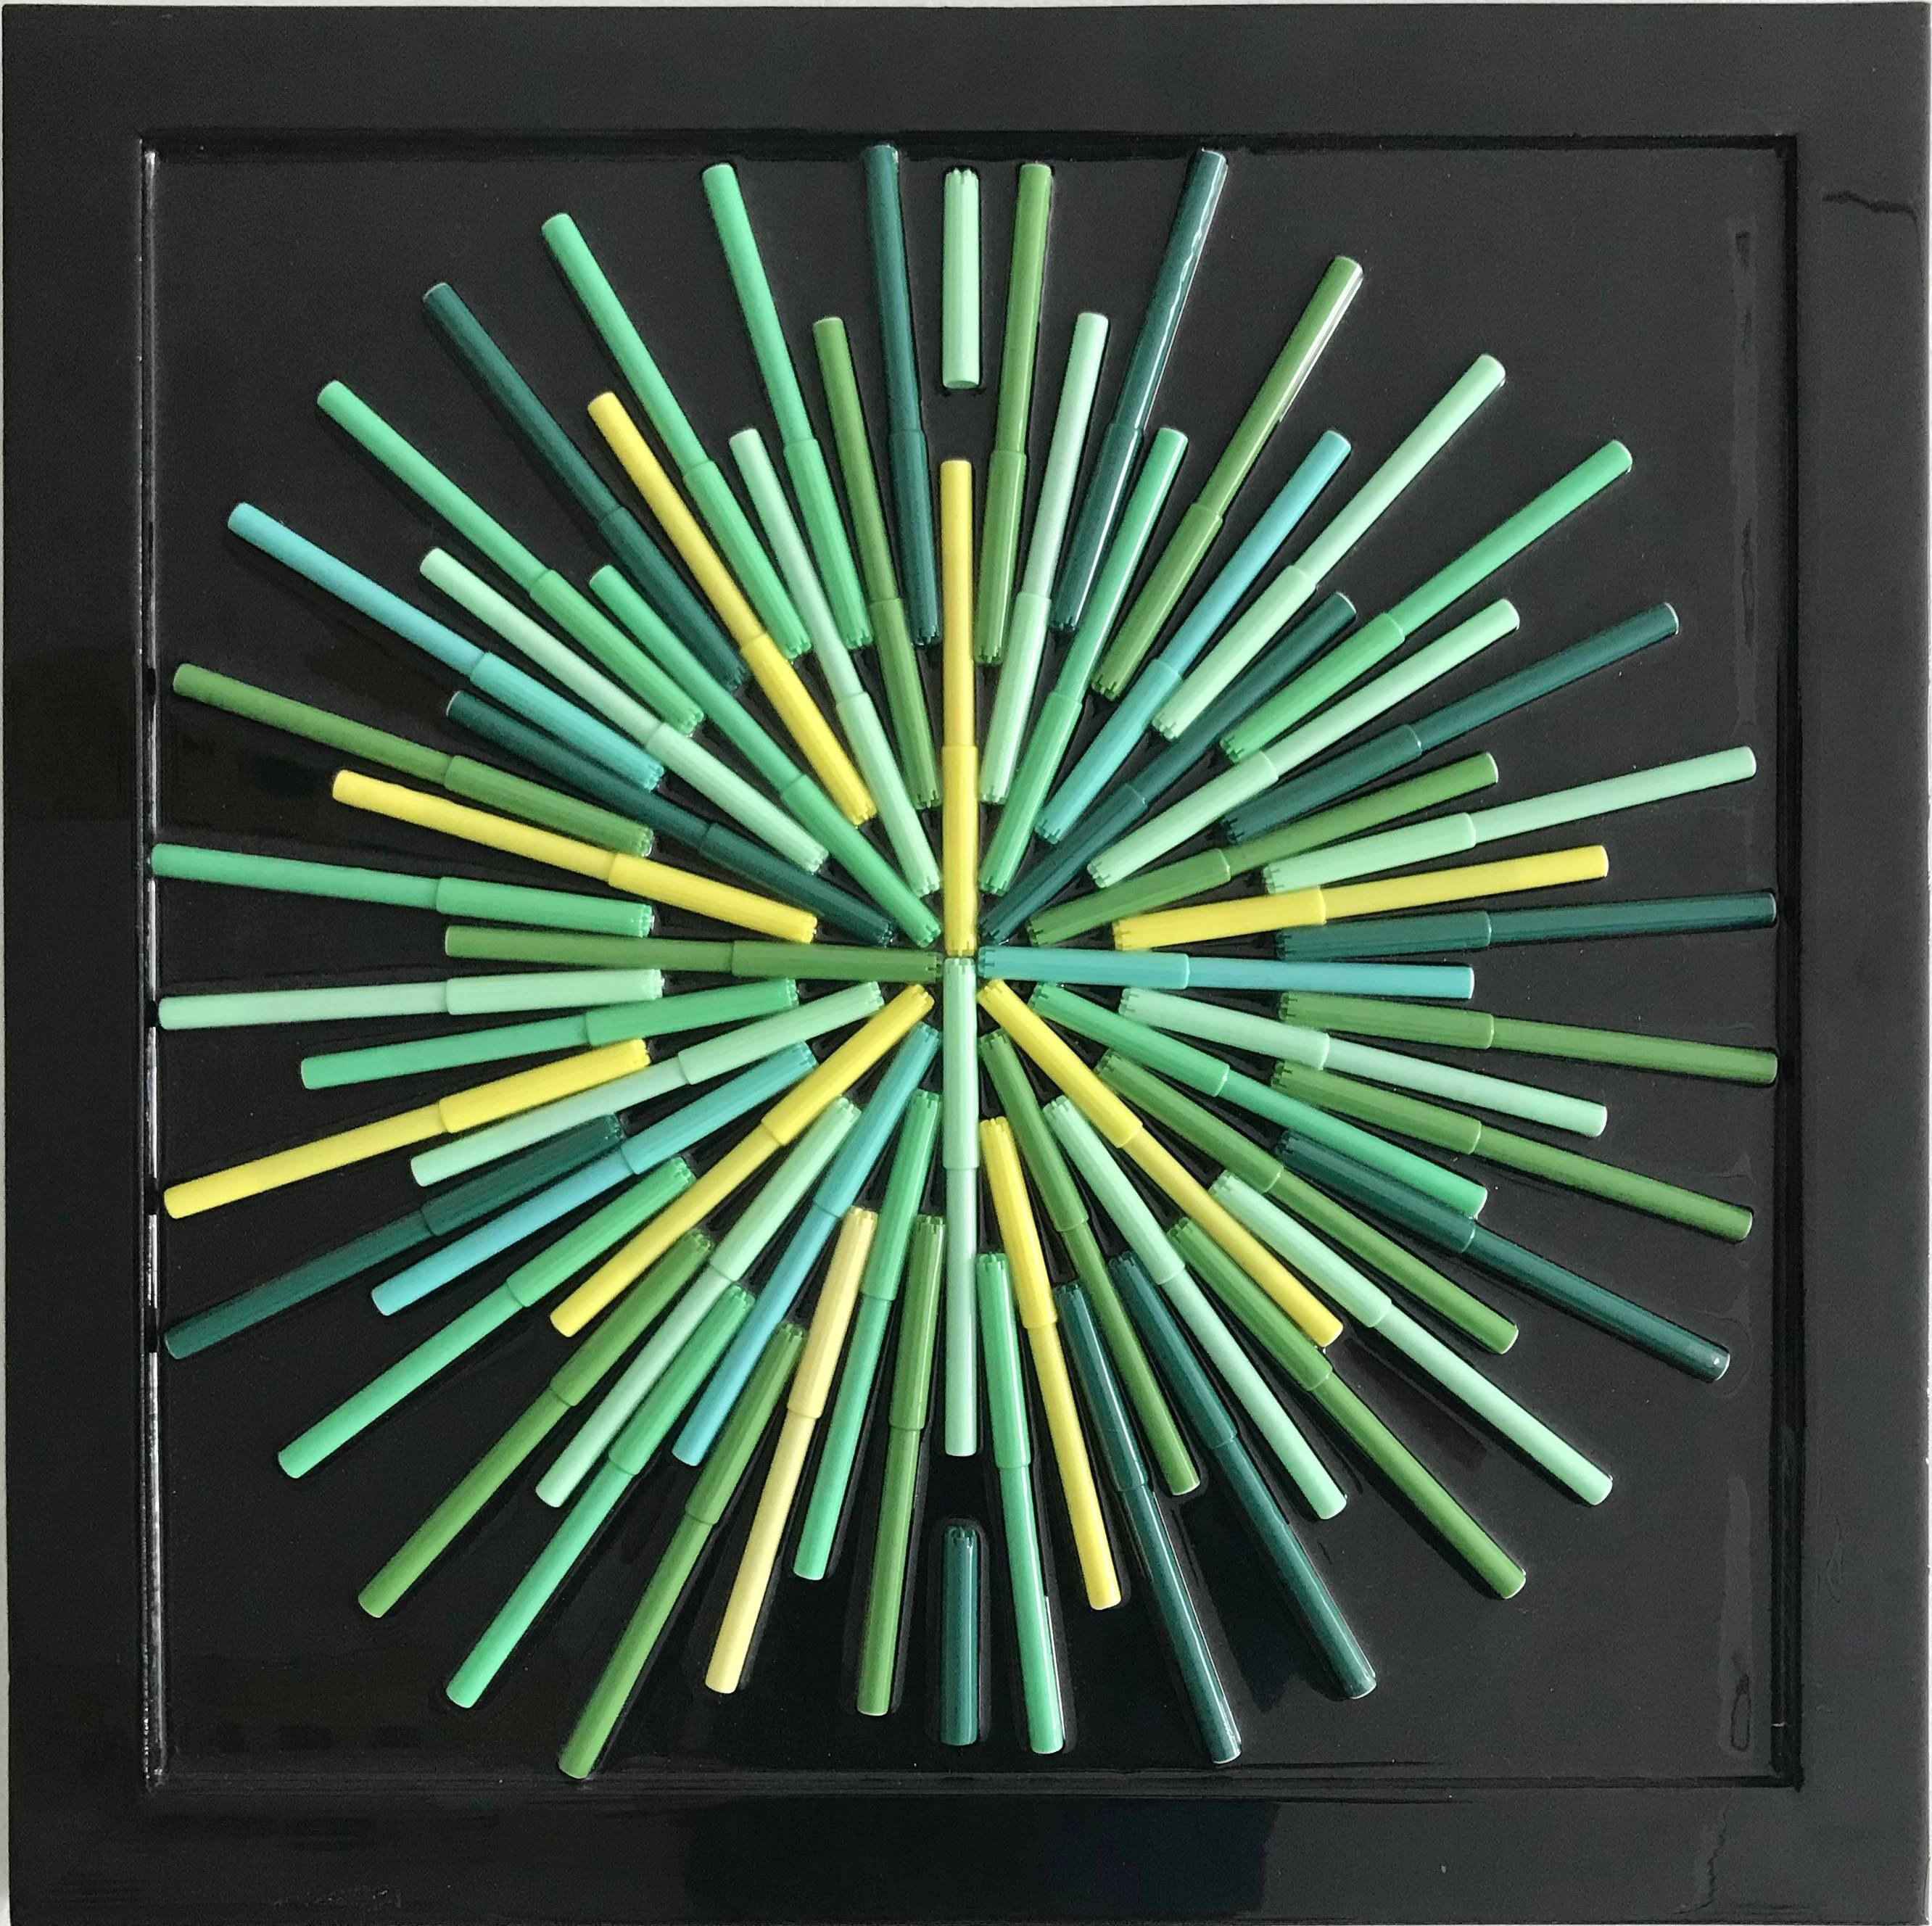 Colorado by Mauro Oliveira, signed. Markers, acrylic paint covered with resin on wood frame.
Height: 20 inches / Width: 20 inches / Depth: 0.75 inches
1 in stock in Los Angeles
Order Reference #: FABIOLTD MOFB5

Brazilian artist Mauro Oliveira